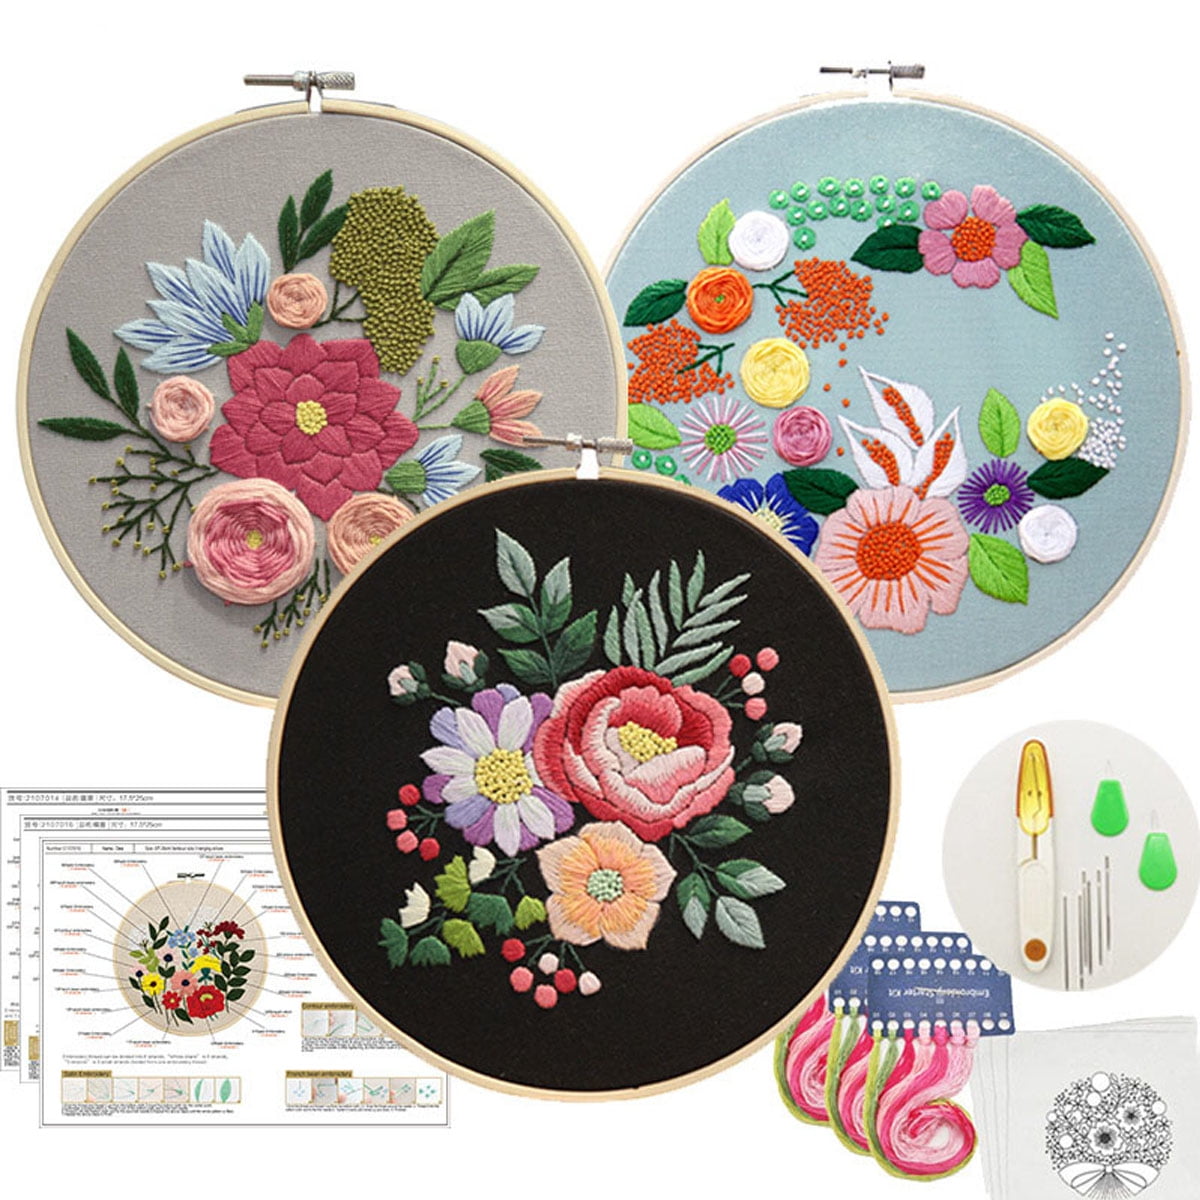 ARAZADR Full Range of Embroidery Starter Kits for Home Wall Decor Stamped Cross Stitch Kits for Beginners Kids and Adults DIY Embroidery 11CT 3